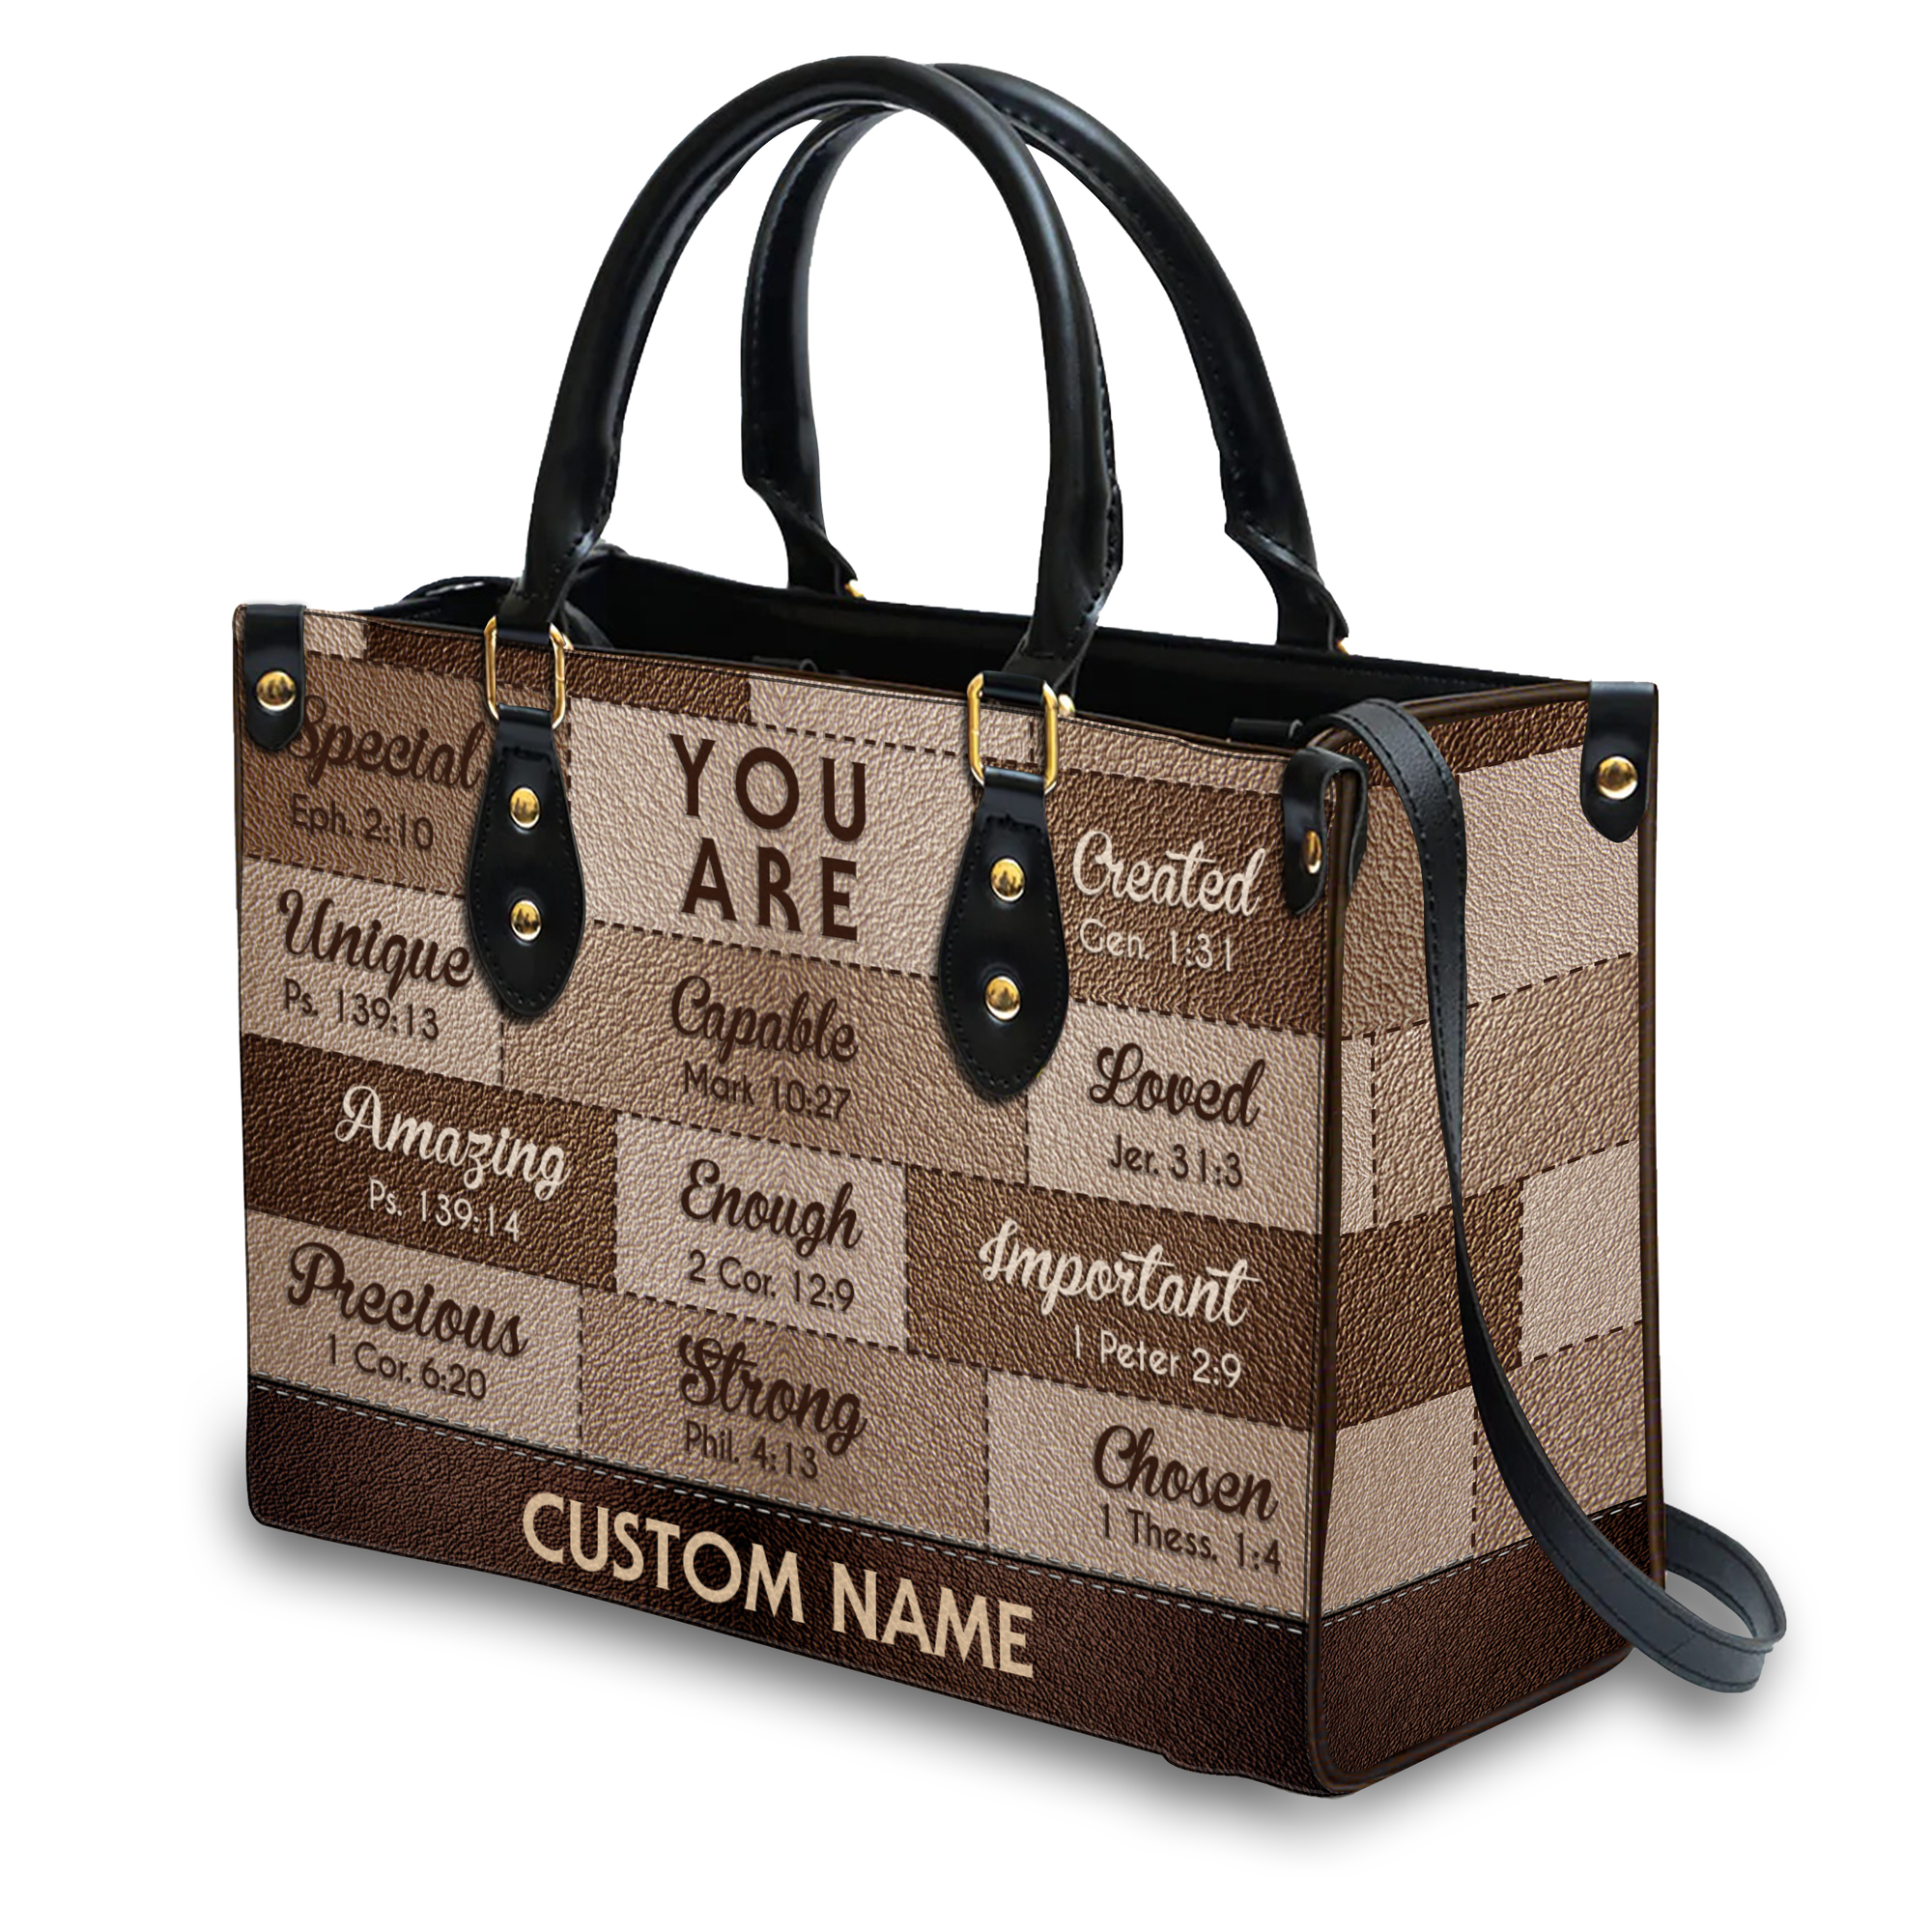 Colored Leather Texture Inspirational You Are Custom Leather Handbag - Personalized Custom Leather Bag